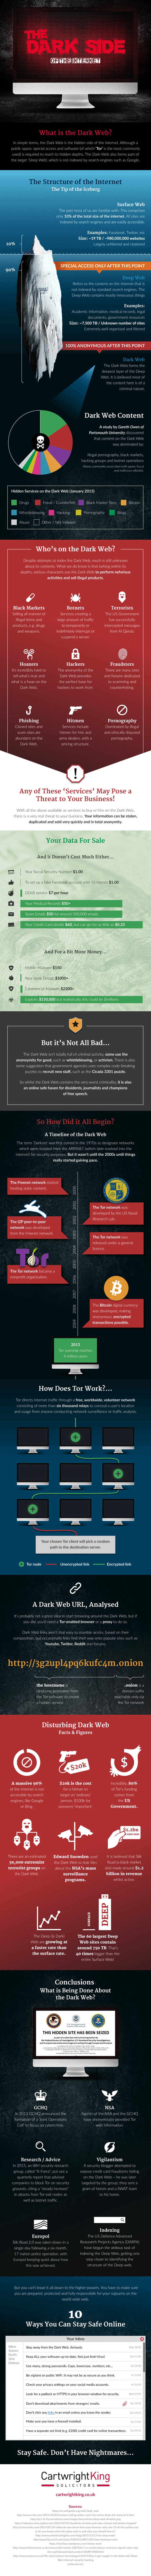 What's On The Dark Web Infographic